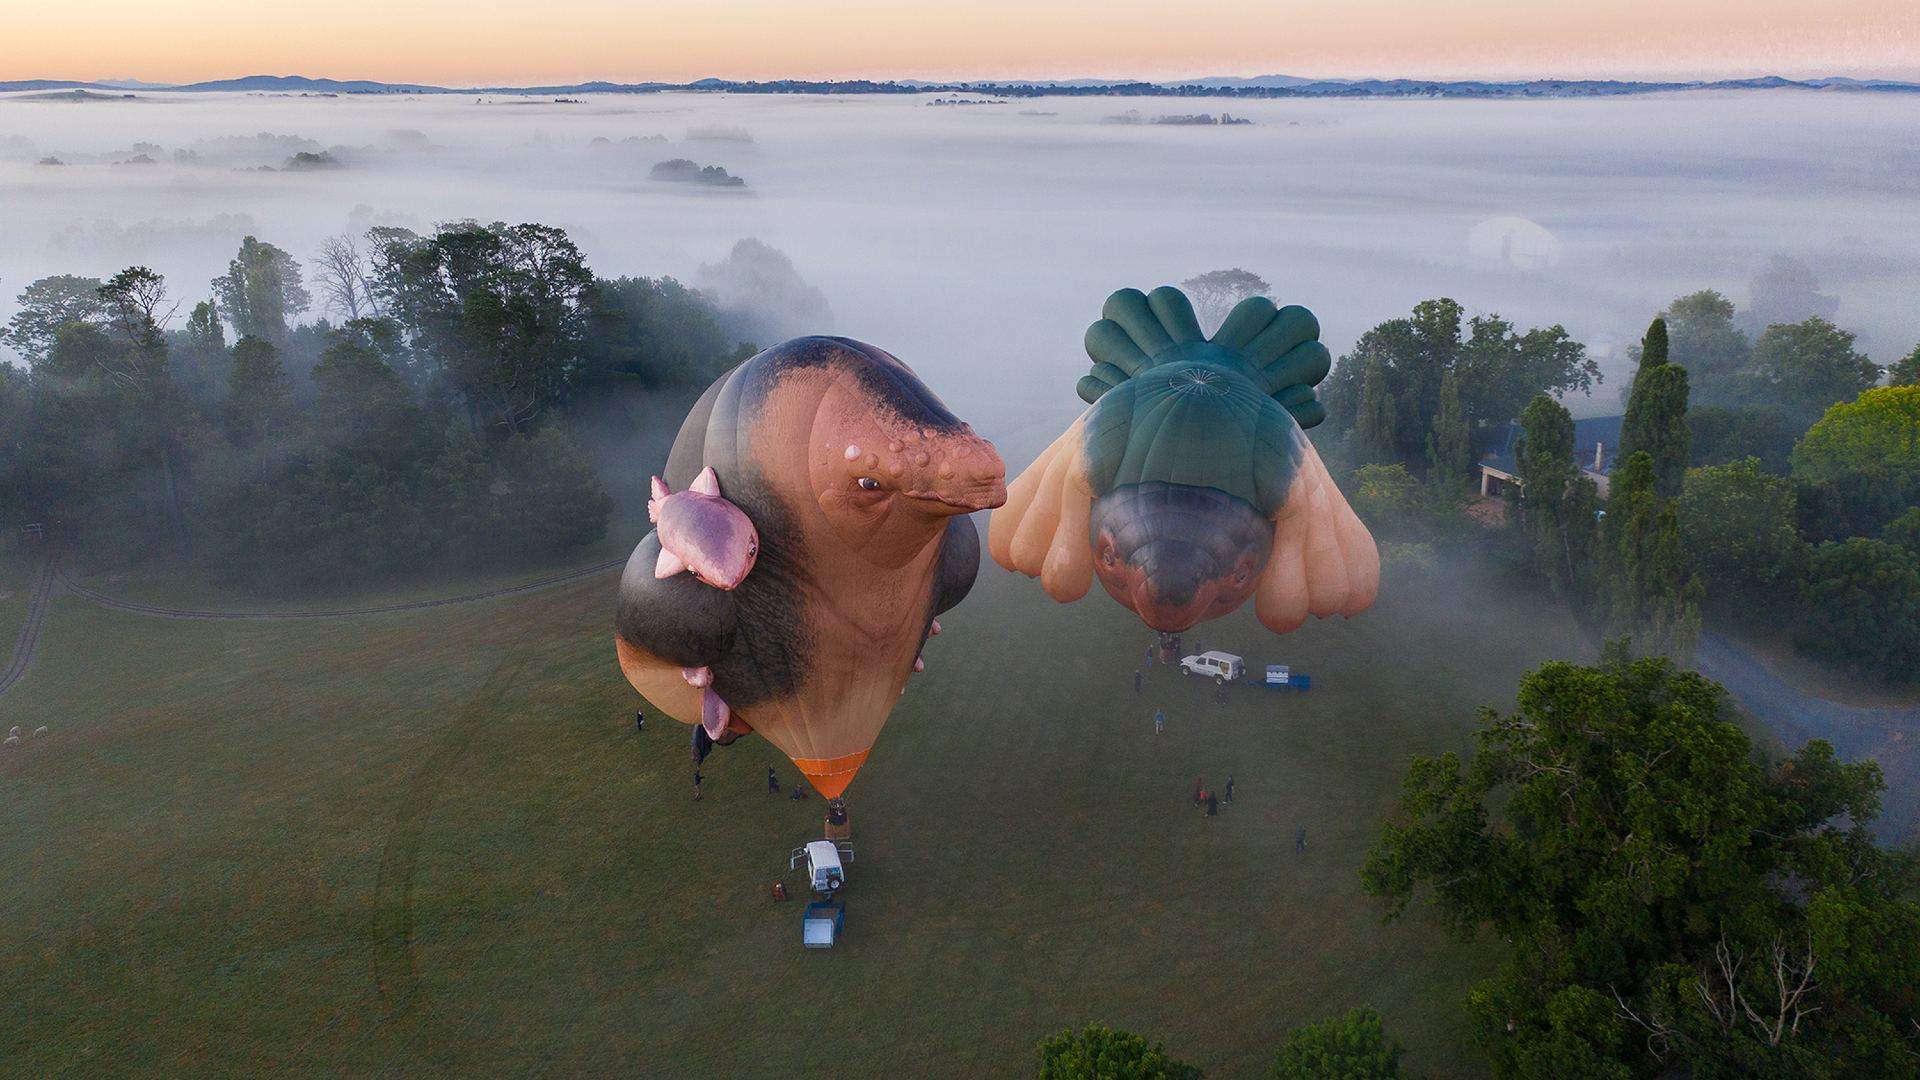 Patricia Piccinini's 'Skywhale' Has Returned to the Skies with Its New Companion 'Skywhalepapa'